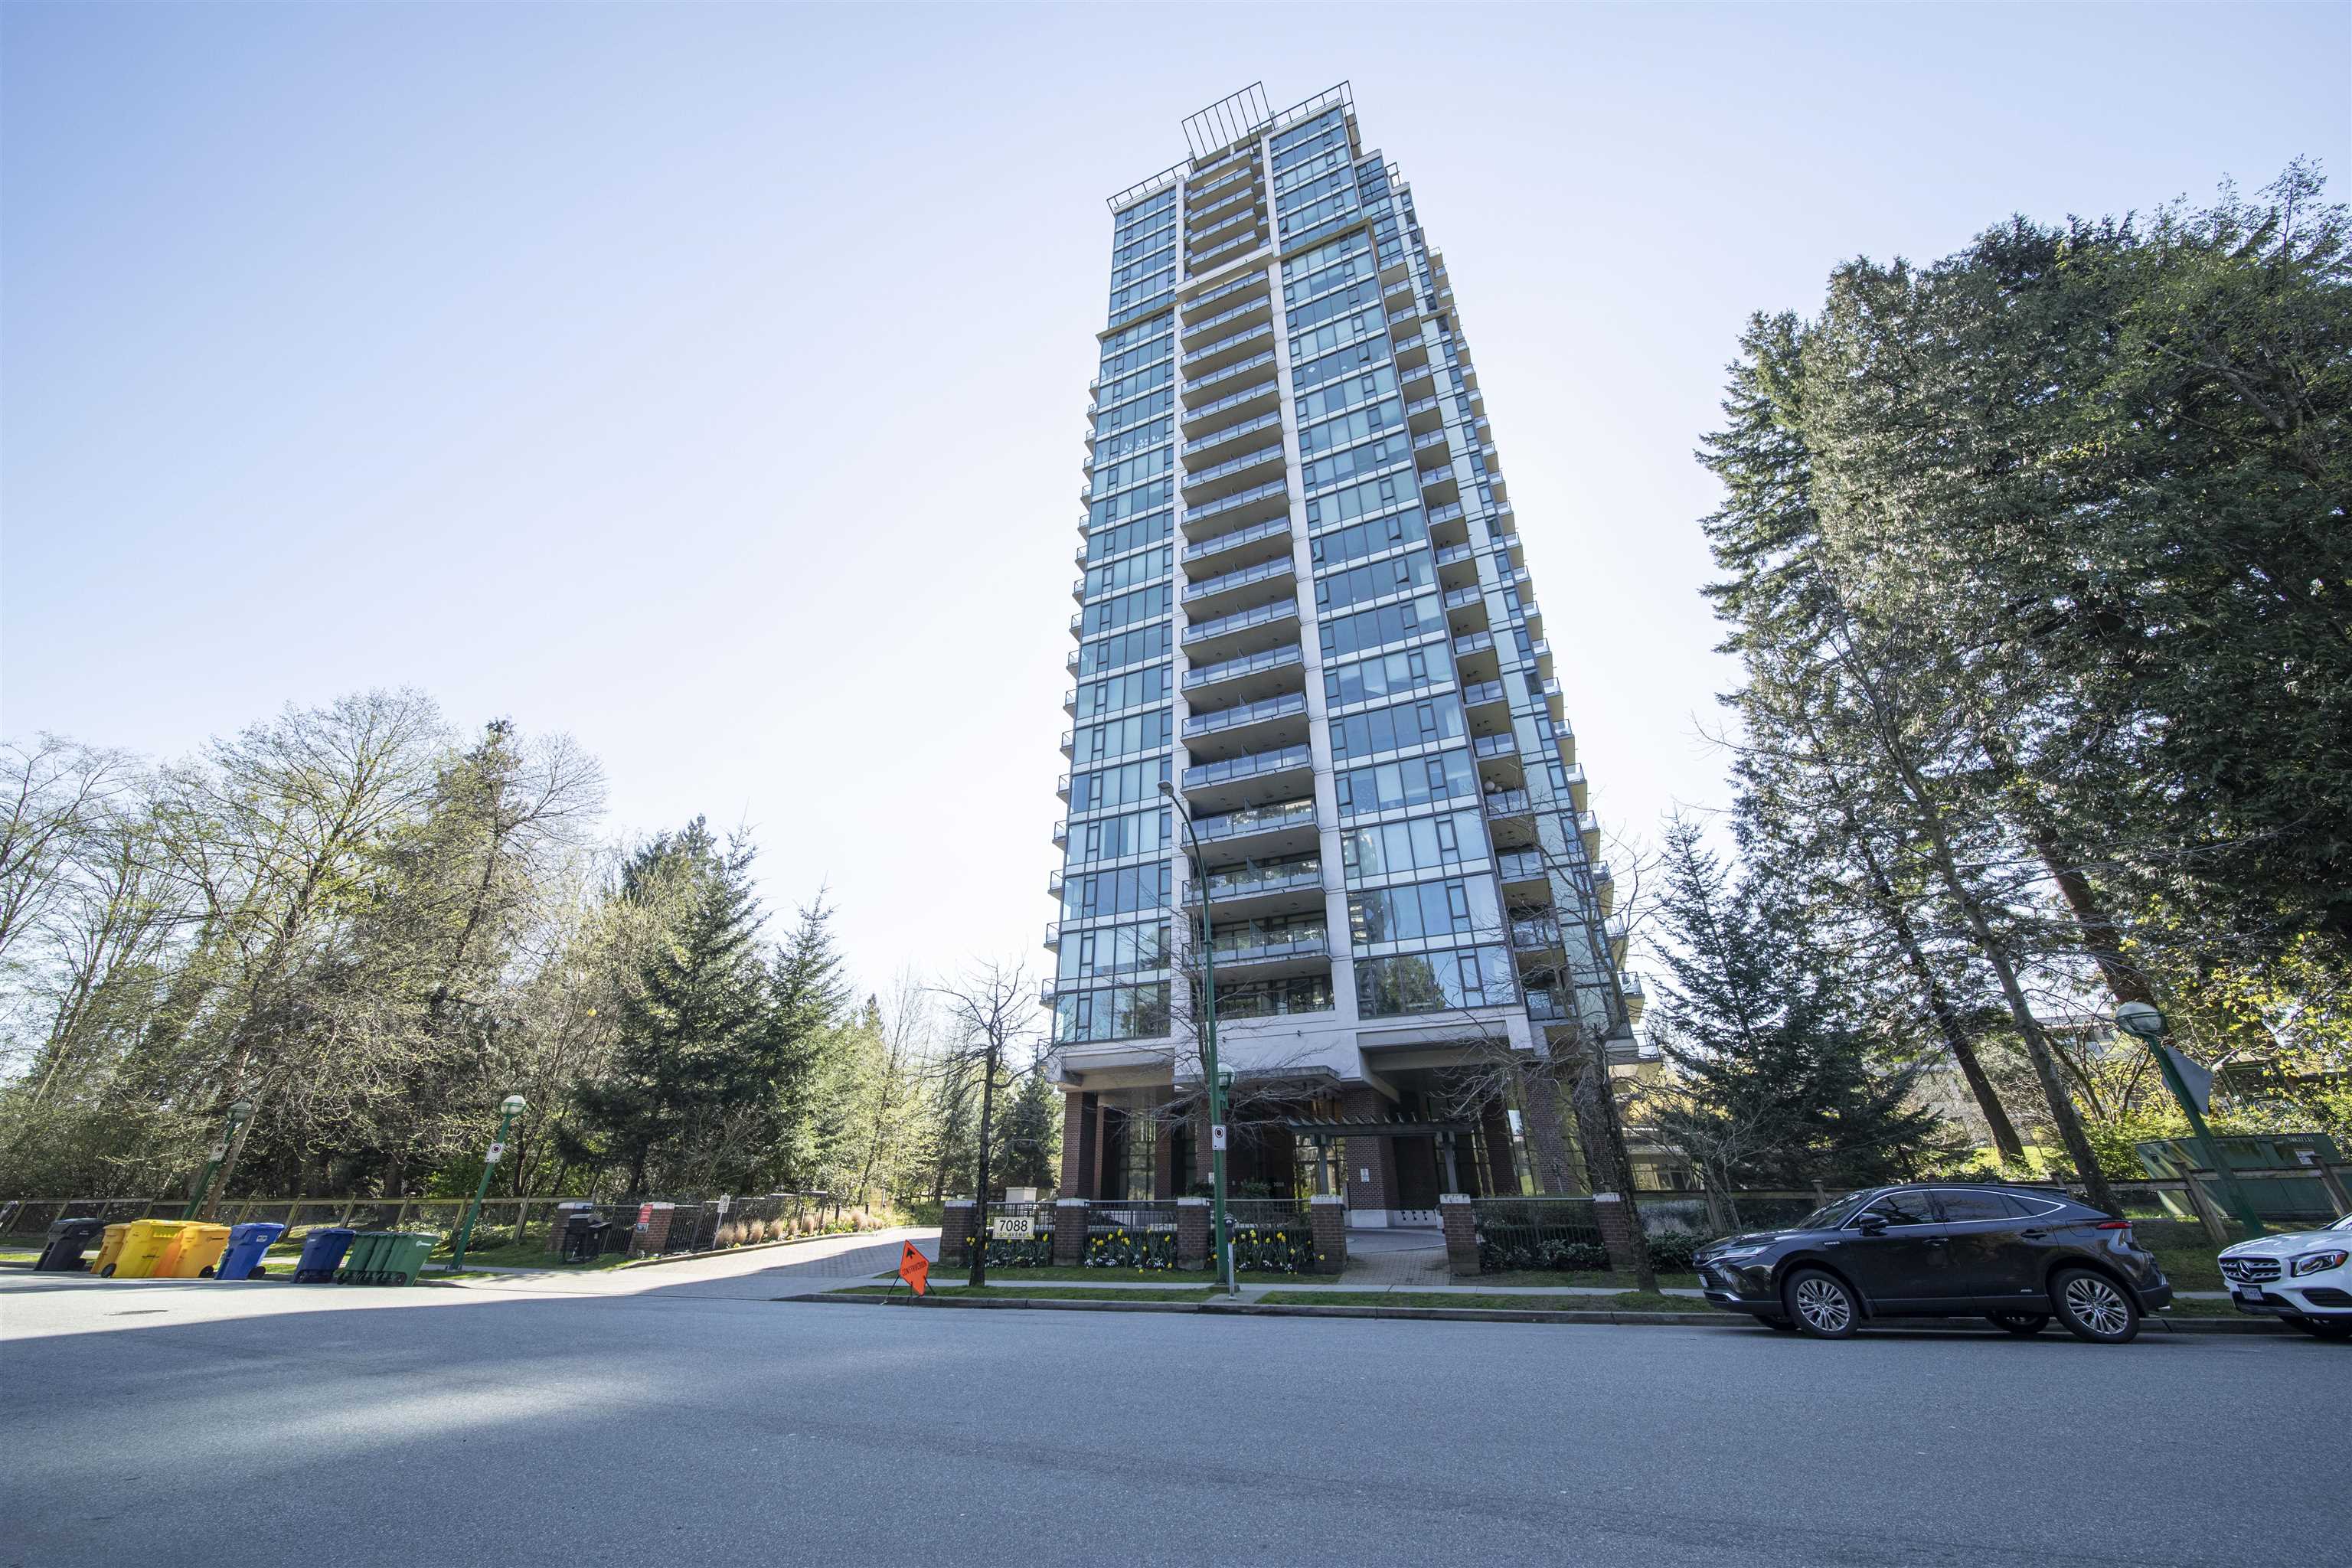 Wilson Lam Realtor, 2501-7088 18TH AVENUE, Burnaby, British Columbia V3N 0A2, 1 Bedroom, 1 Bathroom, Residential Attached,For Sale ,R2721731